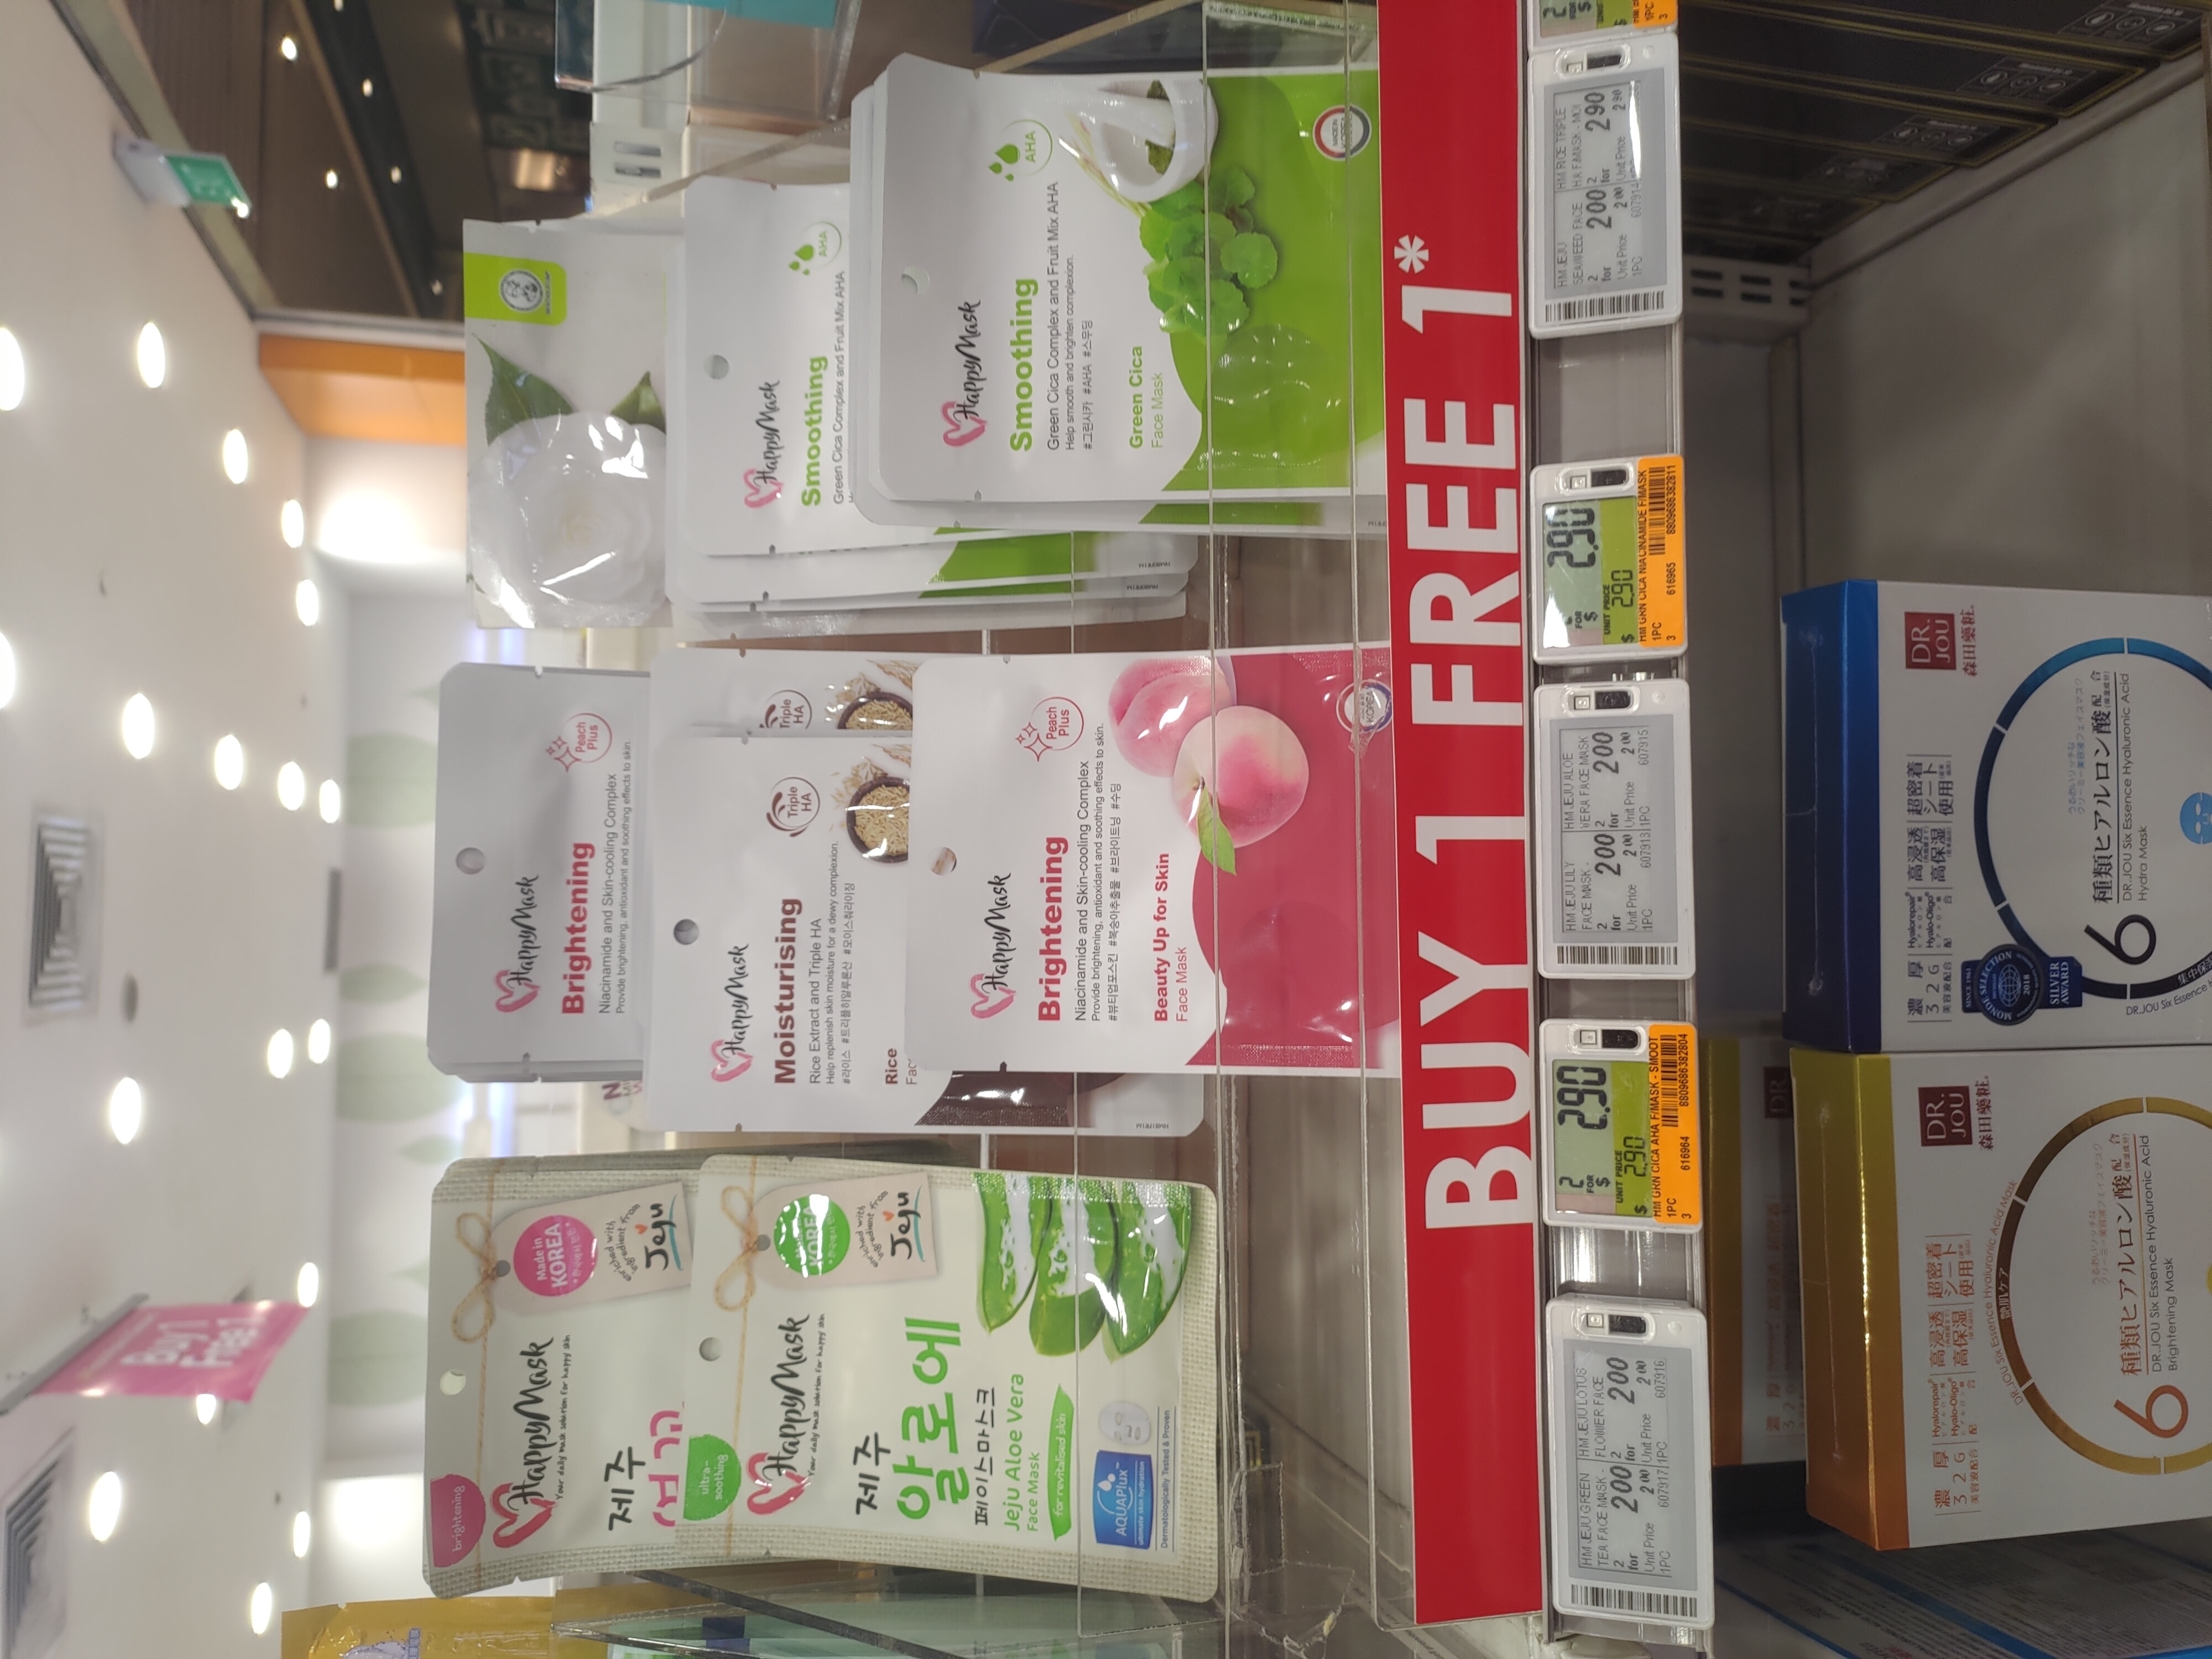 Guardian offering BUY 1 GET 1 FREE on all facial masks and cleansers from now till 1 Nov 20 - 7